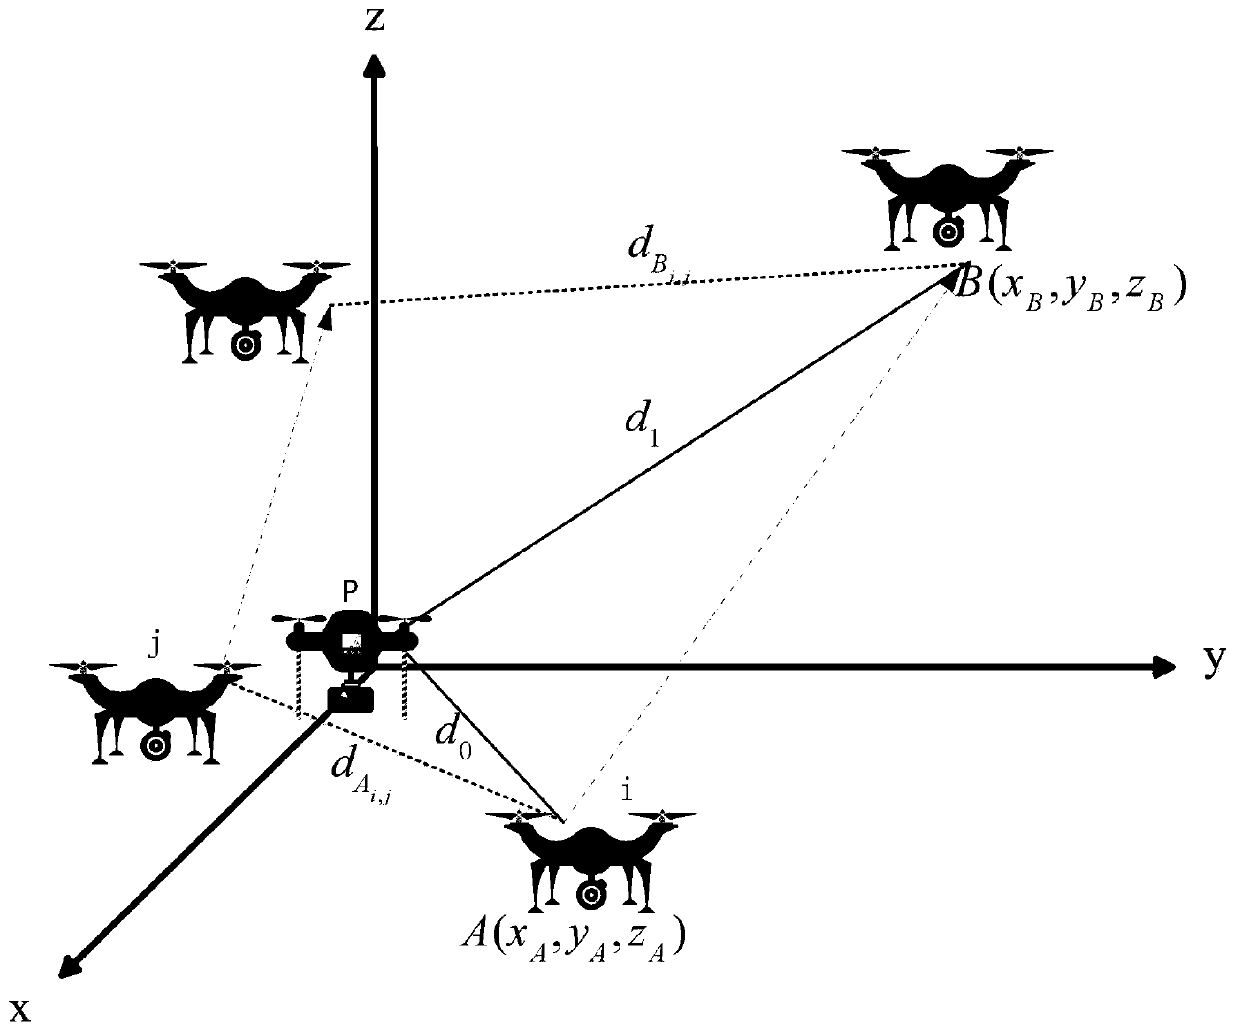 A Distributed Cooperative Spectrum Sensing Method Based on Max-Min Distance Clustering